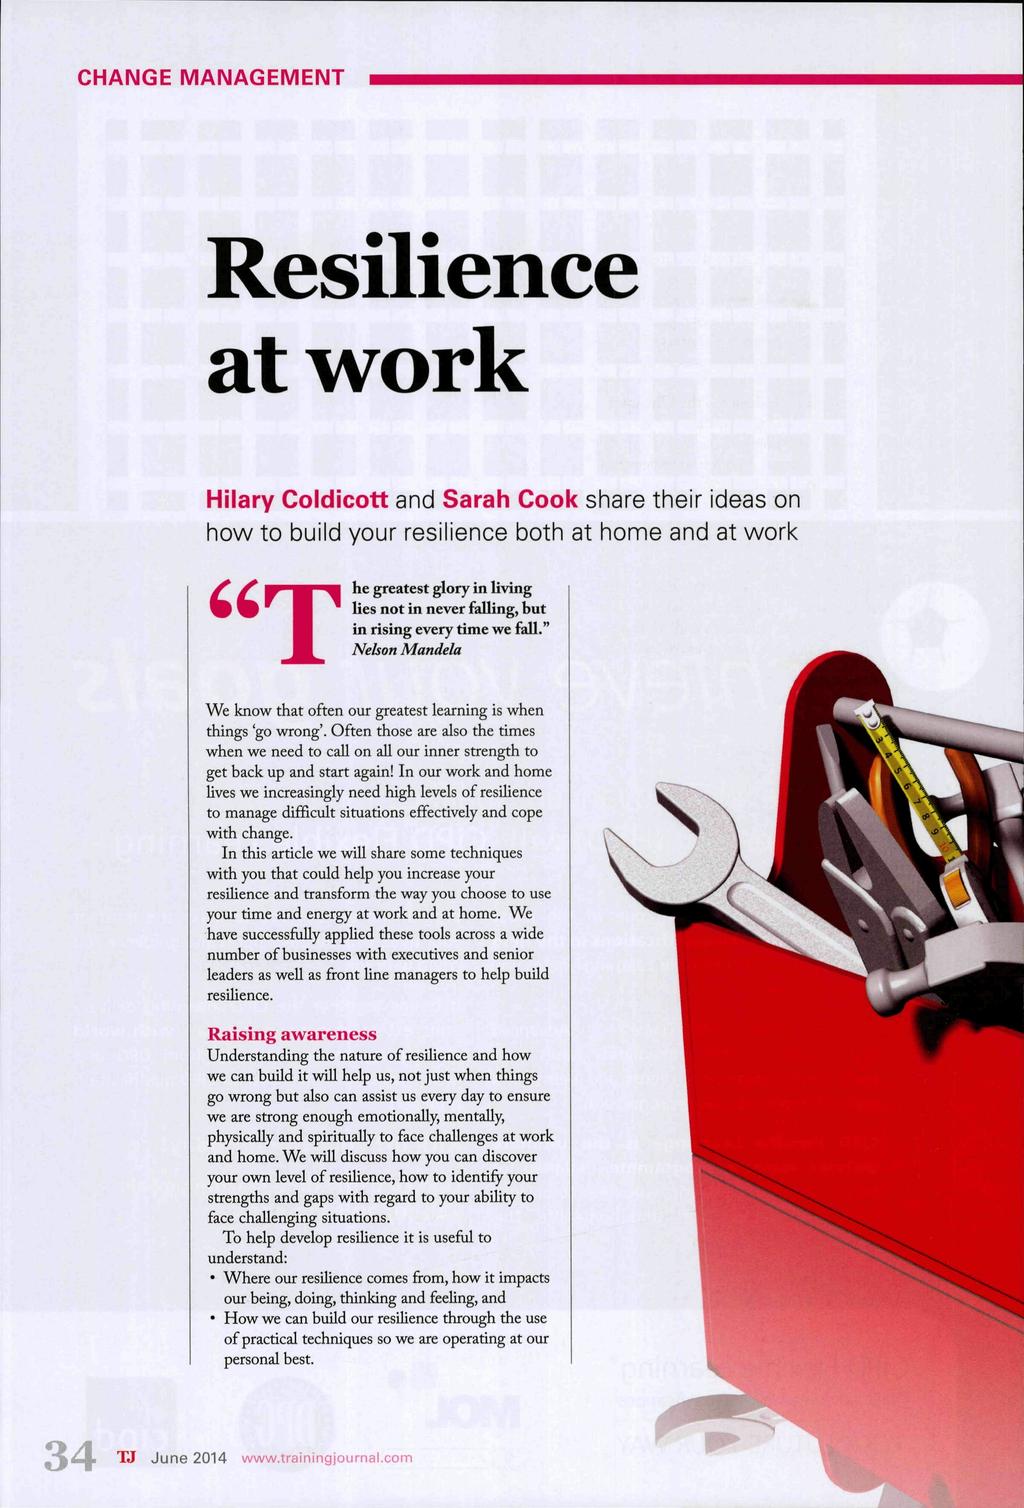 CHANGE MANAGEMENT Resilience at work Hilary Coldicott and Sarah Cook share their ideas on how to build your resilience both at honne and at work he greatest glory in living lies not in never falling,